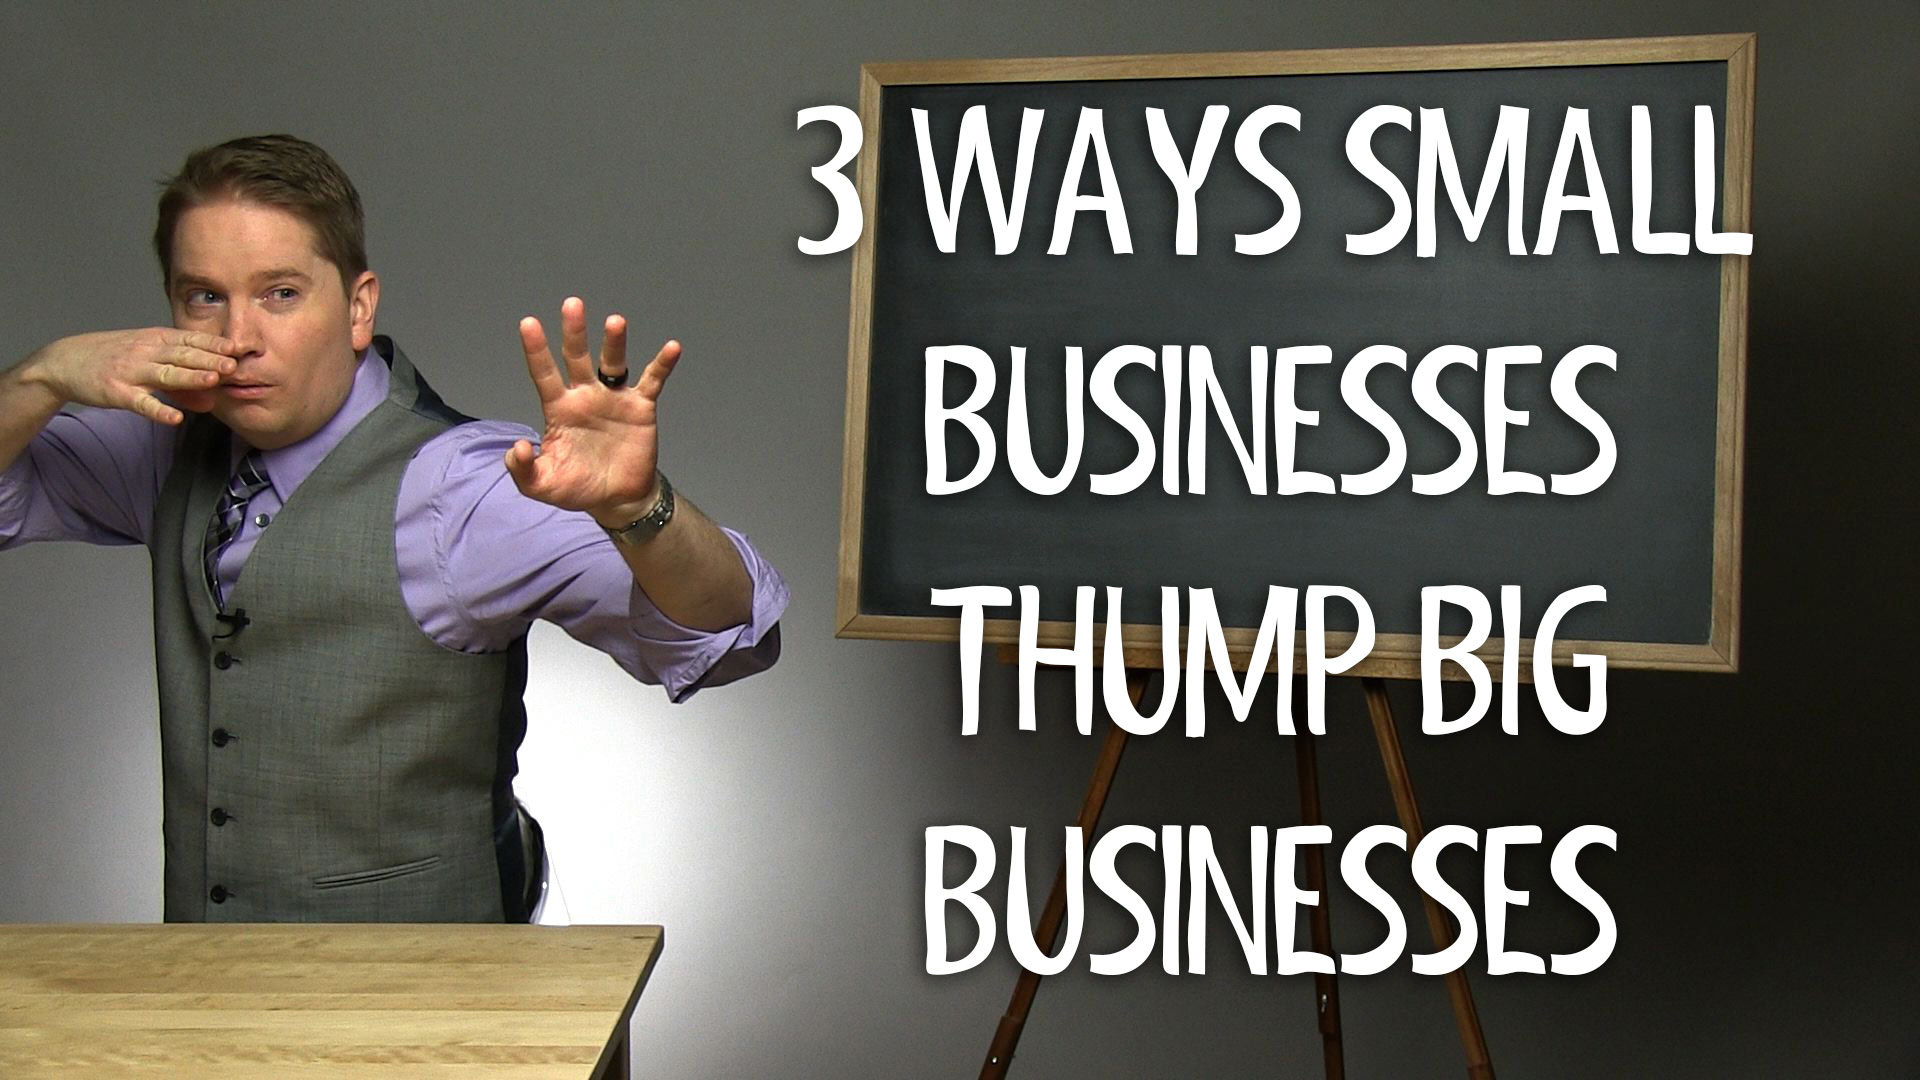 3 Ways Small Businesses Thump Big Businesses